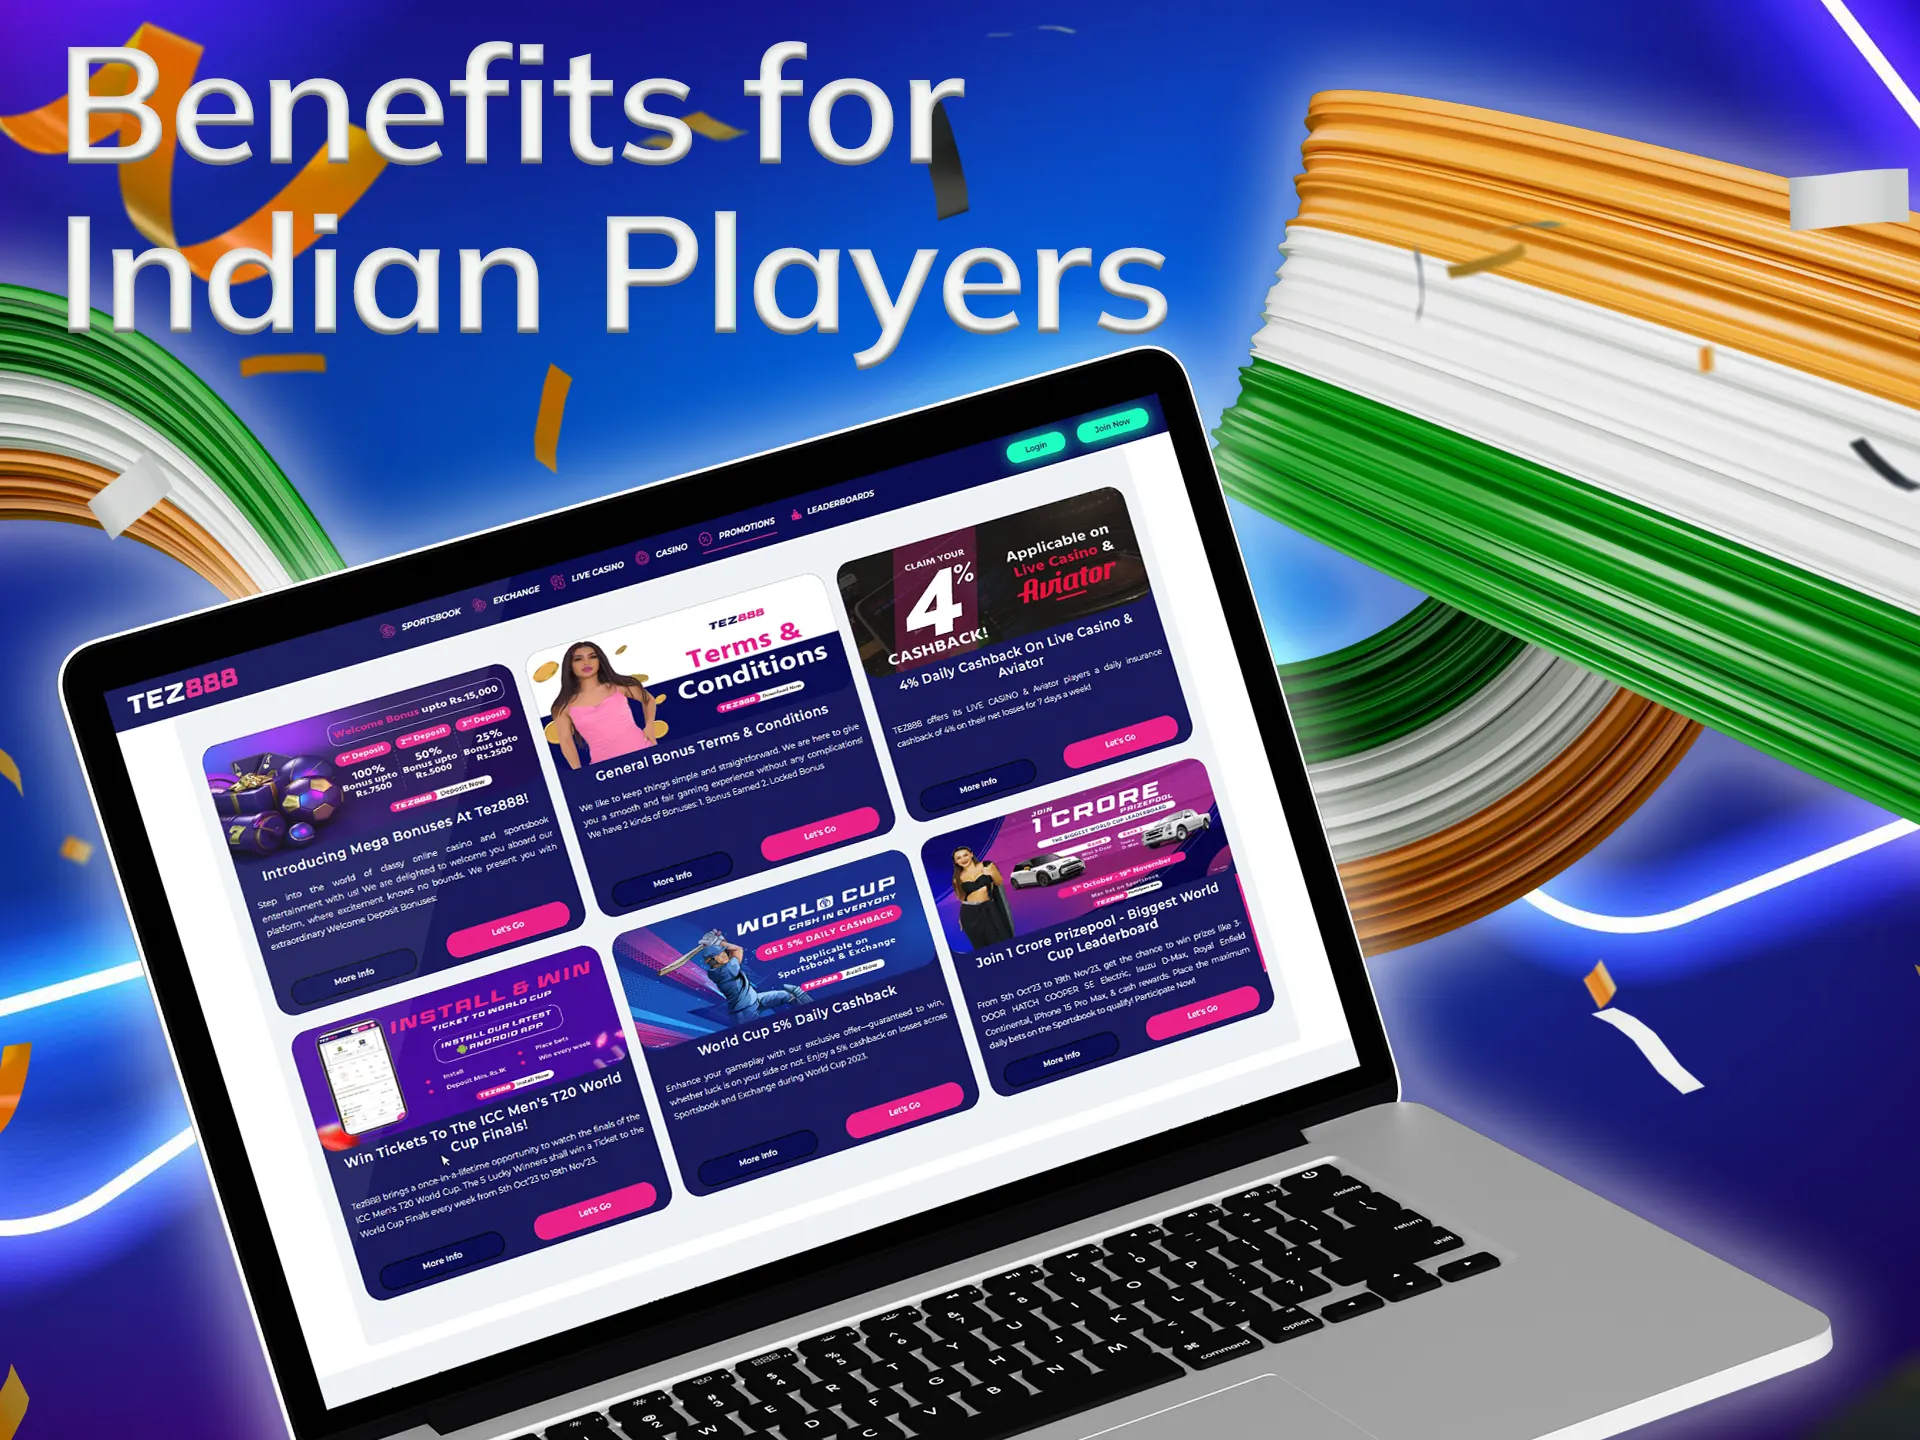 The tez888 betting platform offers a lot of benefits for Indian players.